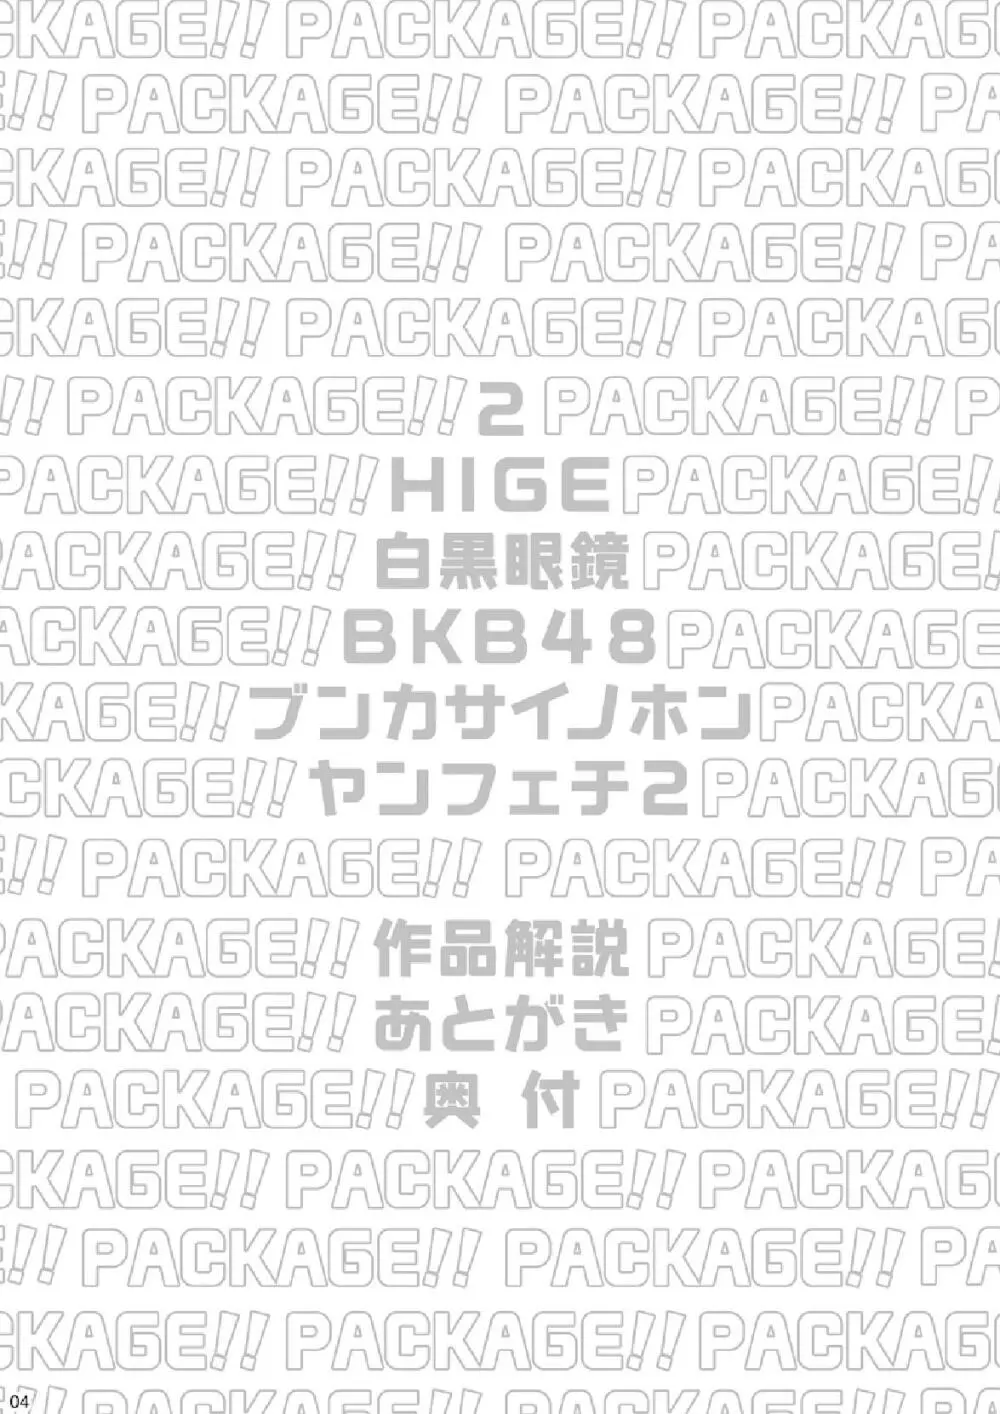 Package!! 4ページ